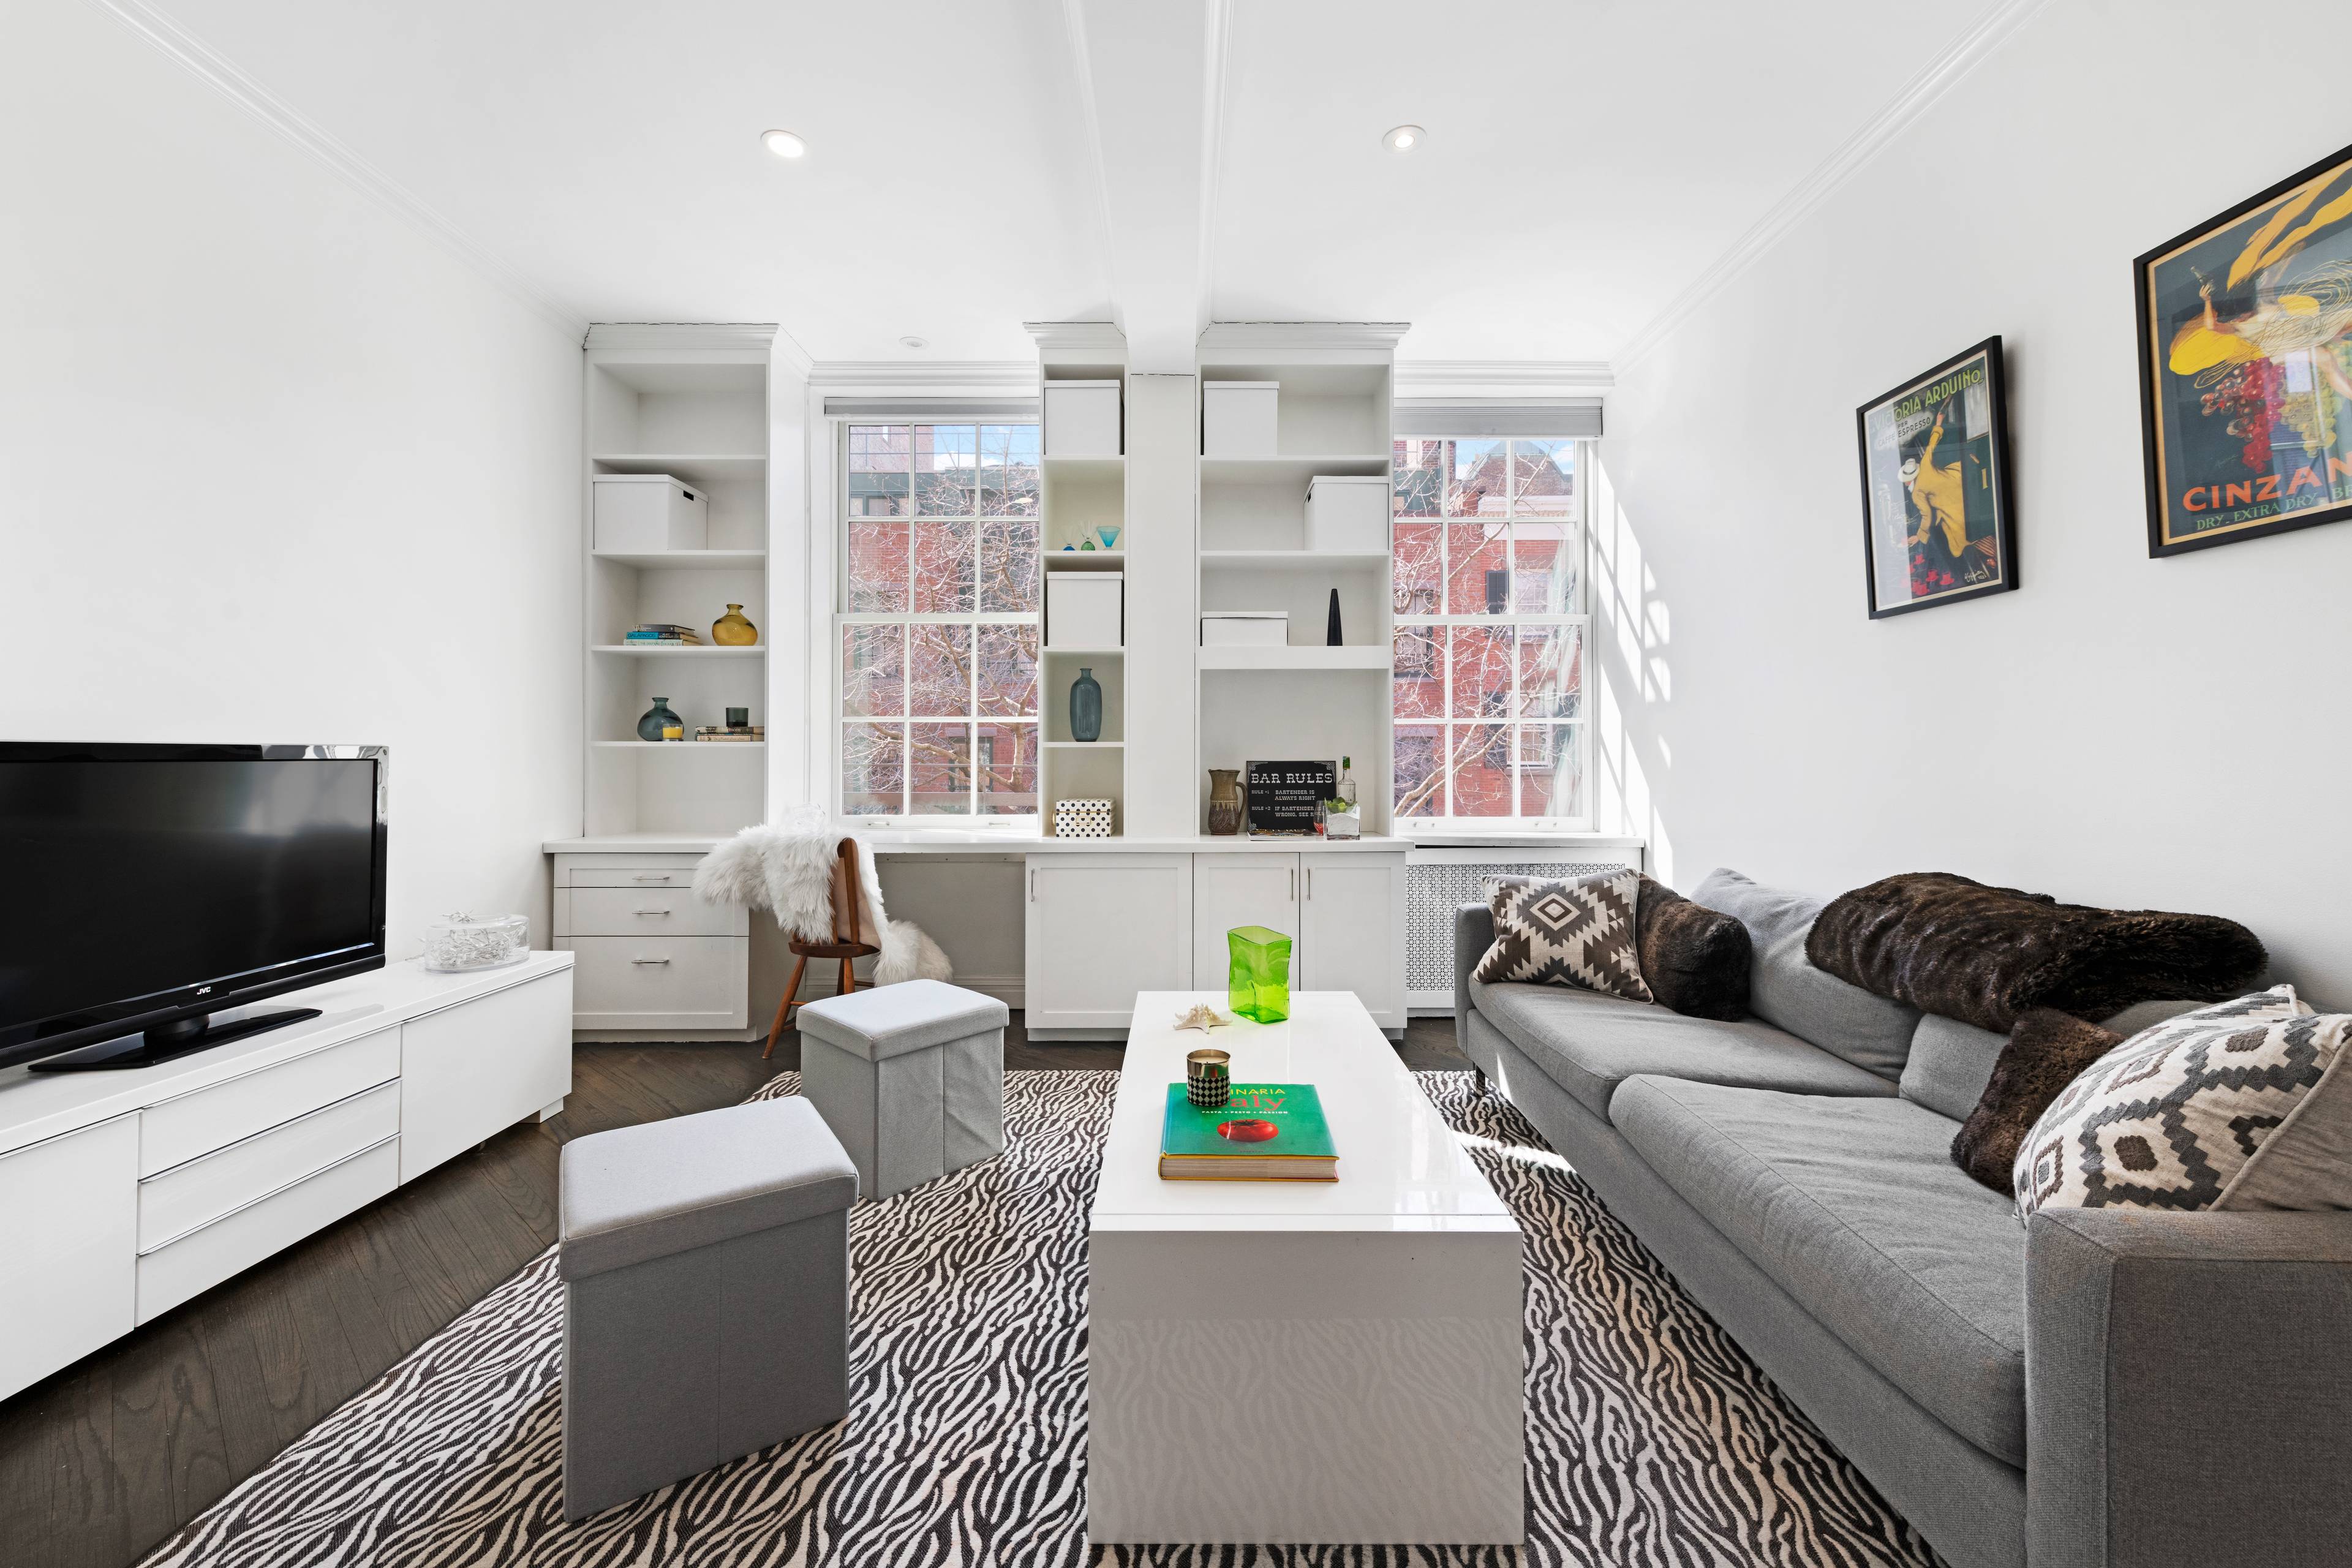 Superb West Village Location This bright one bedroom home is nestled between the beautiful tree lined blocks of the West Village and the Meatpacking District.